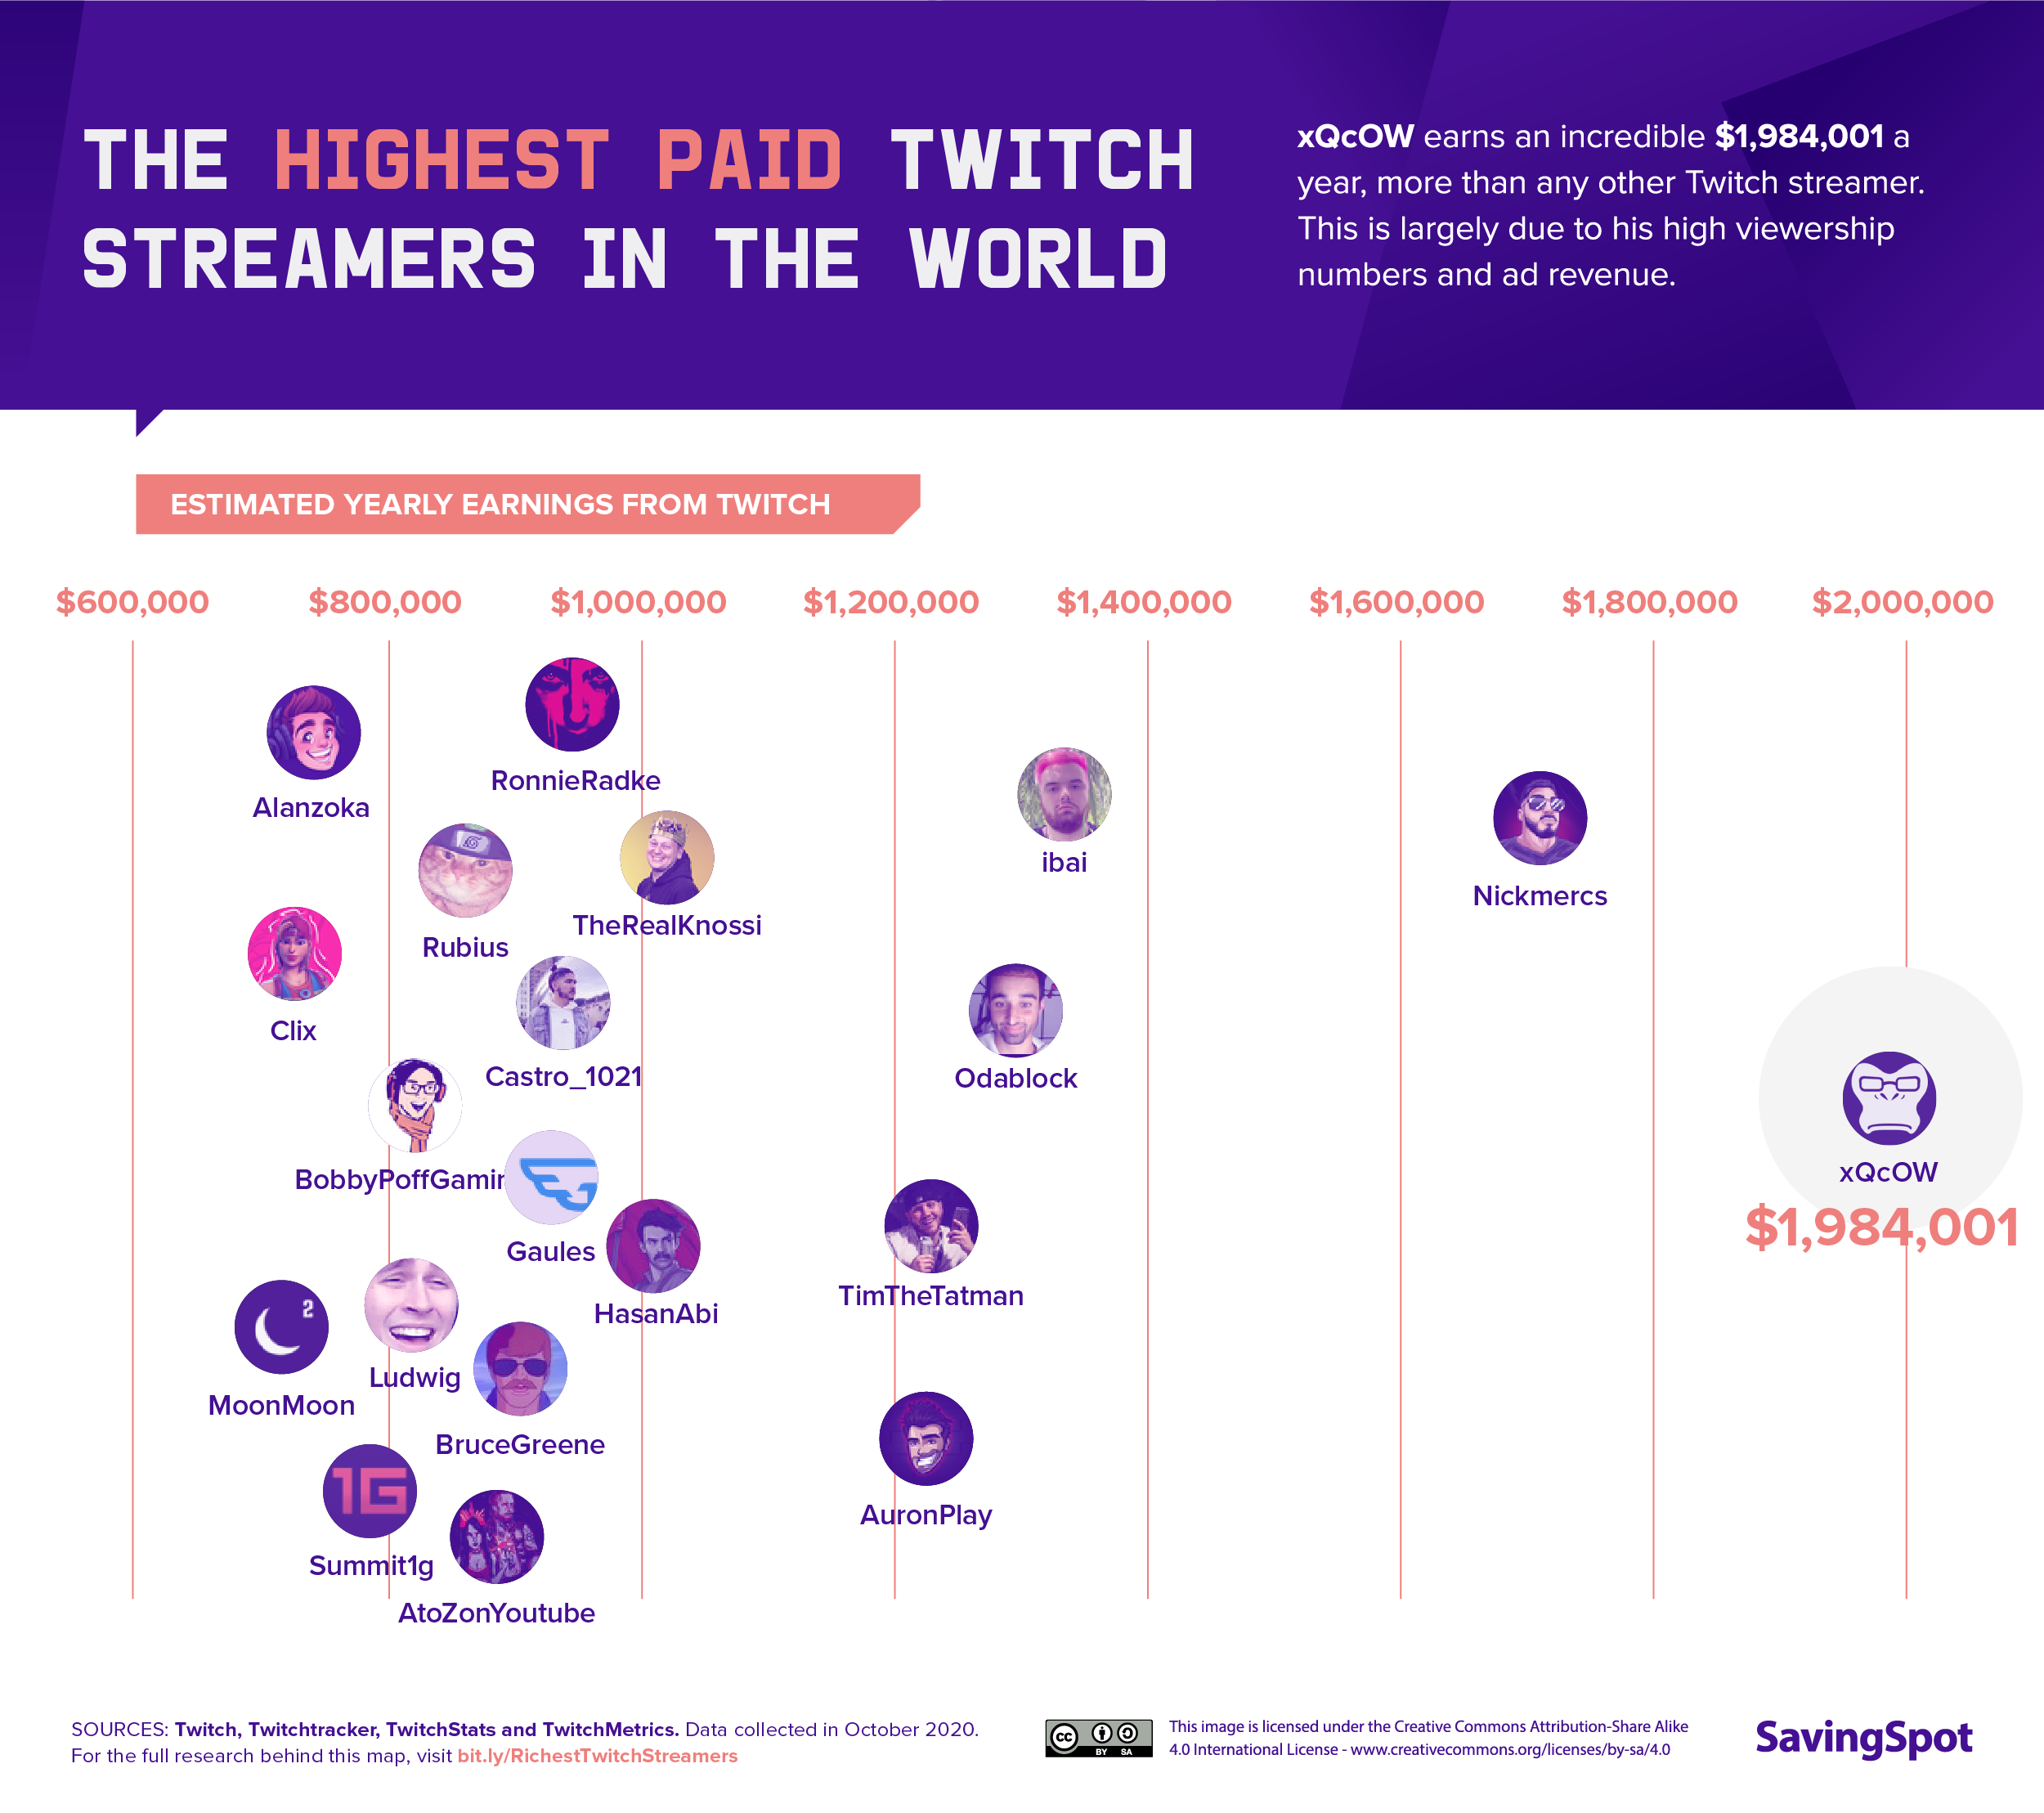 The HighestPaid Twitch Streamers in the World Blog